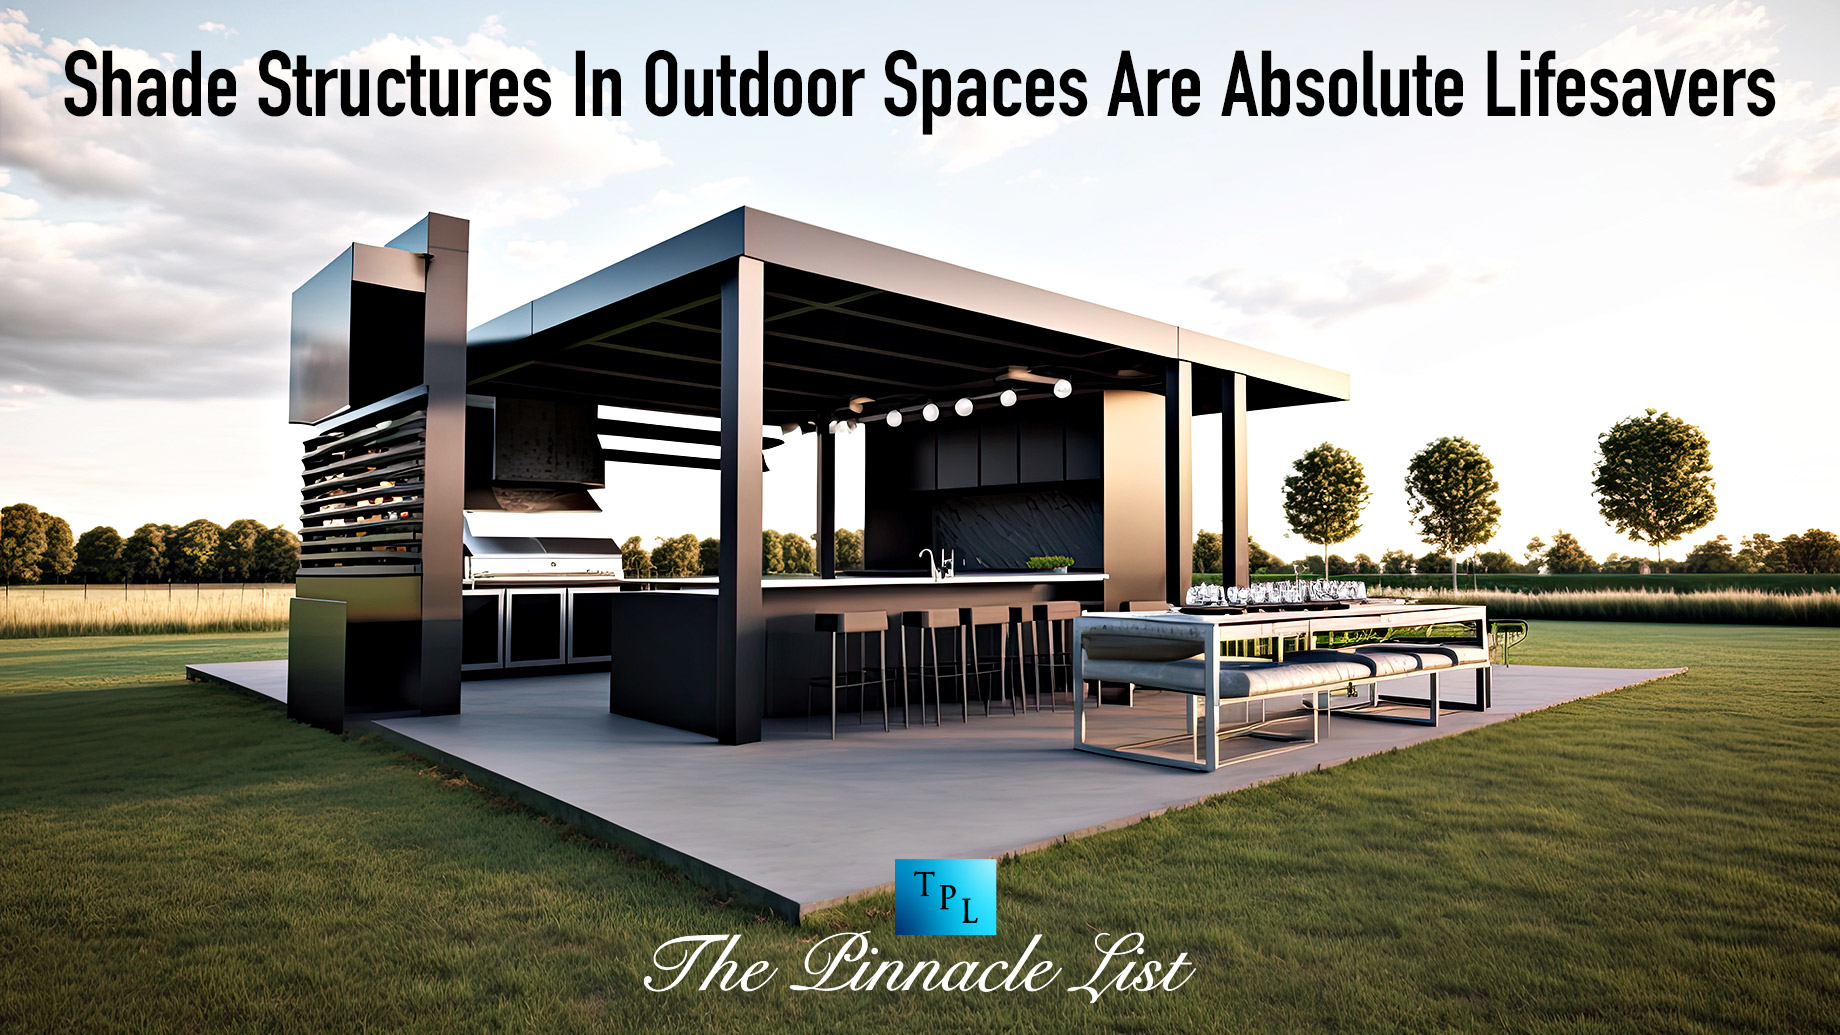 Shade Structures In Outdoor Spaces Are Absolute Lifesavers